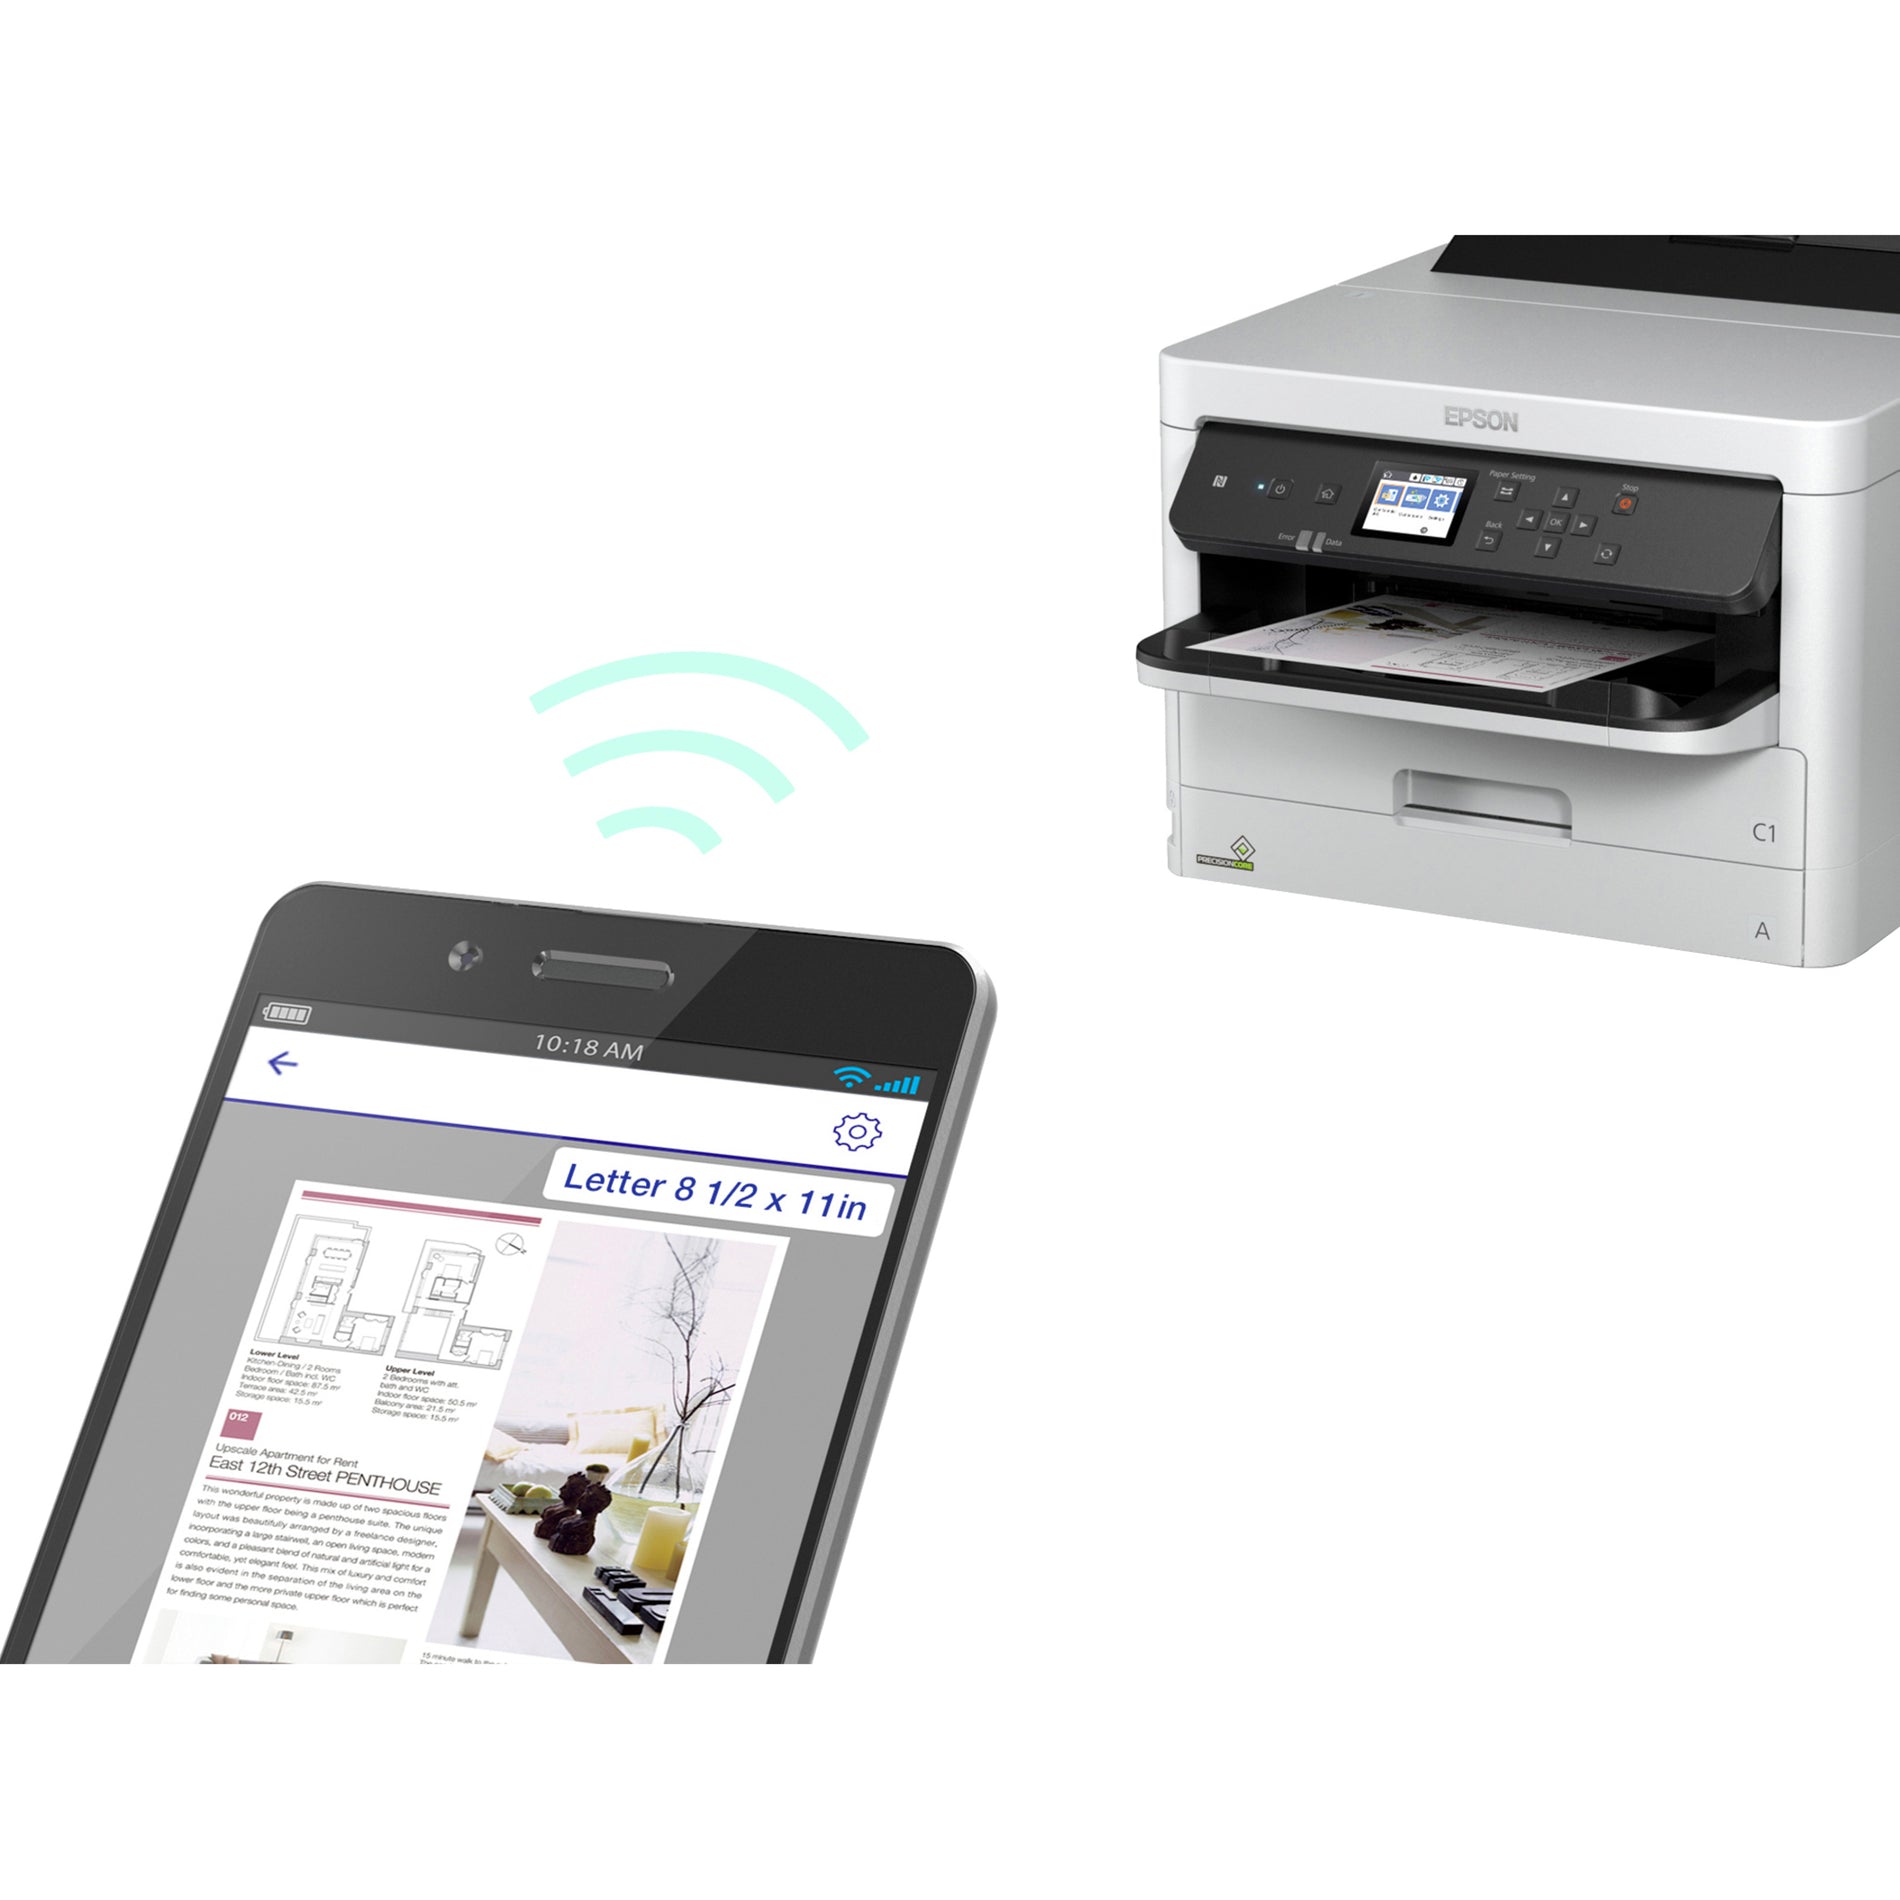 Epson WorkForce Pro WF-C5290 Network Color Printer with Replaceable Ink Pack System [Discontinued]